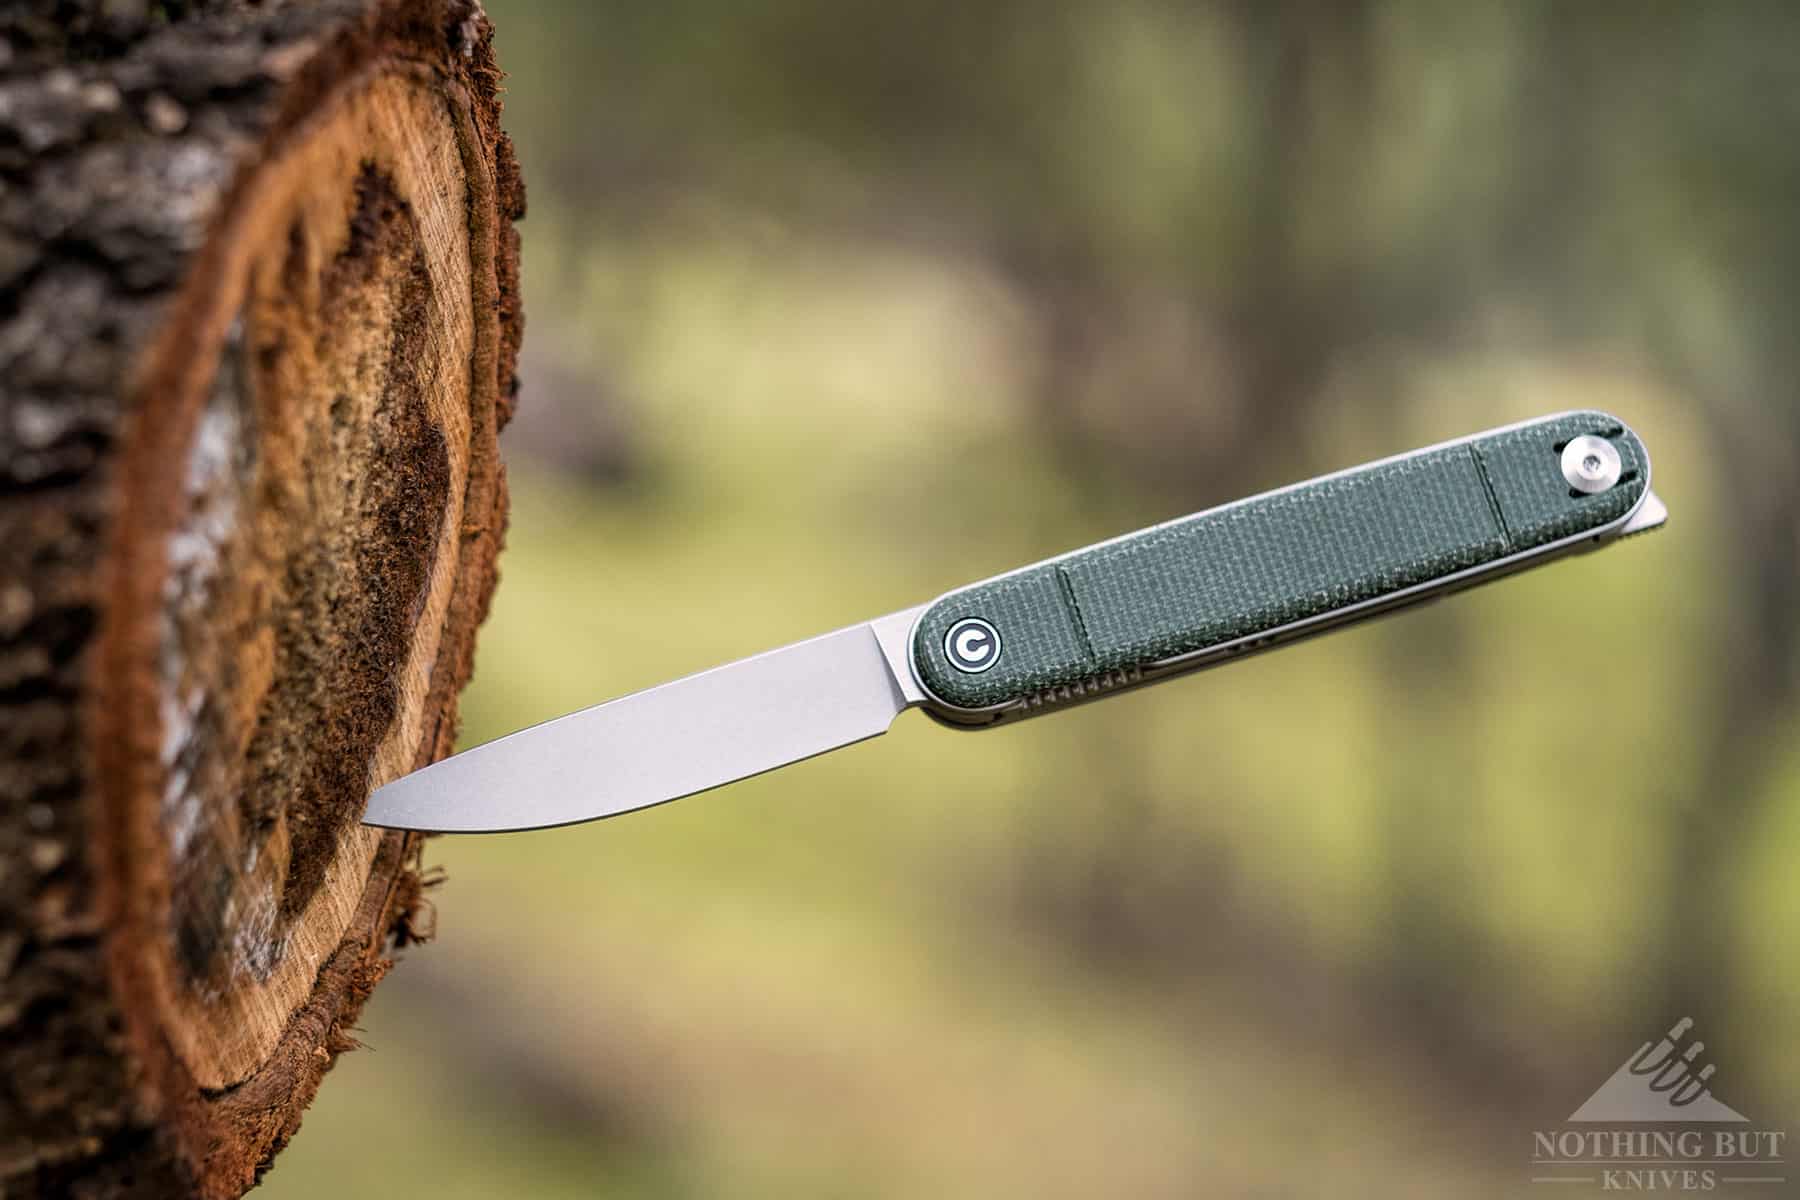 A close-up of the Civivi Crit pocket knife sticking out of a tree stump.